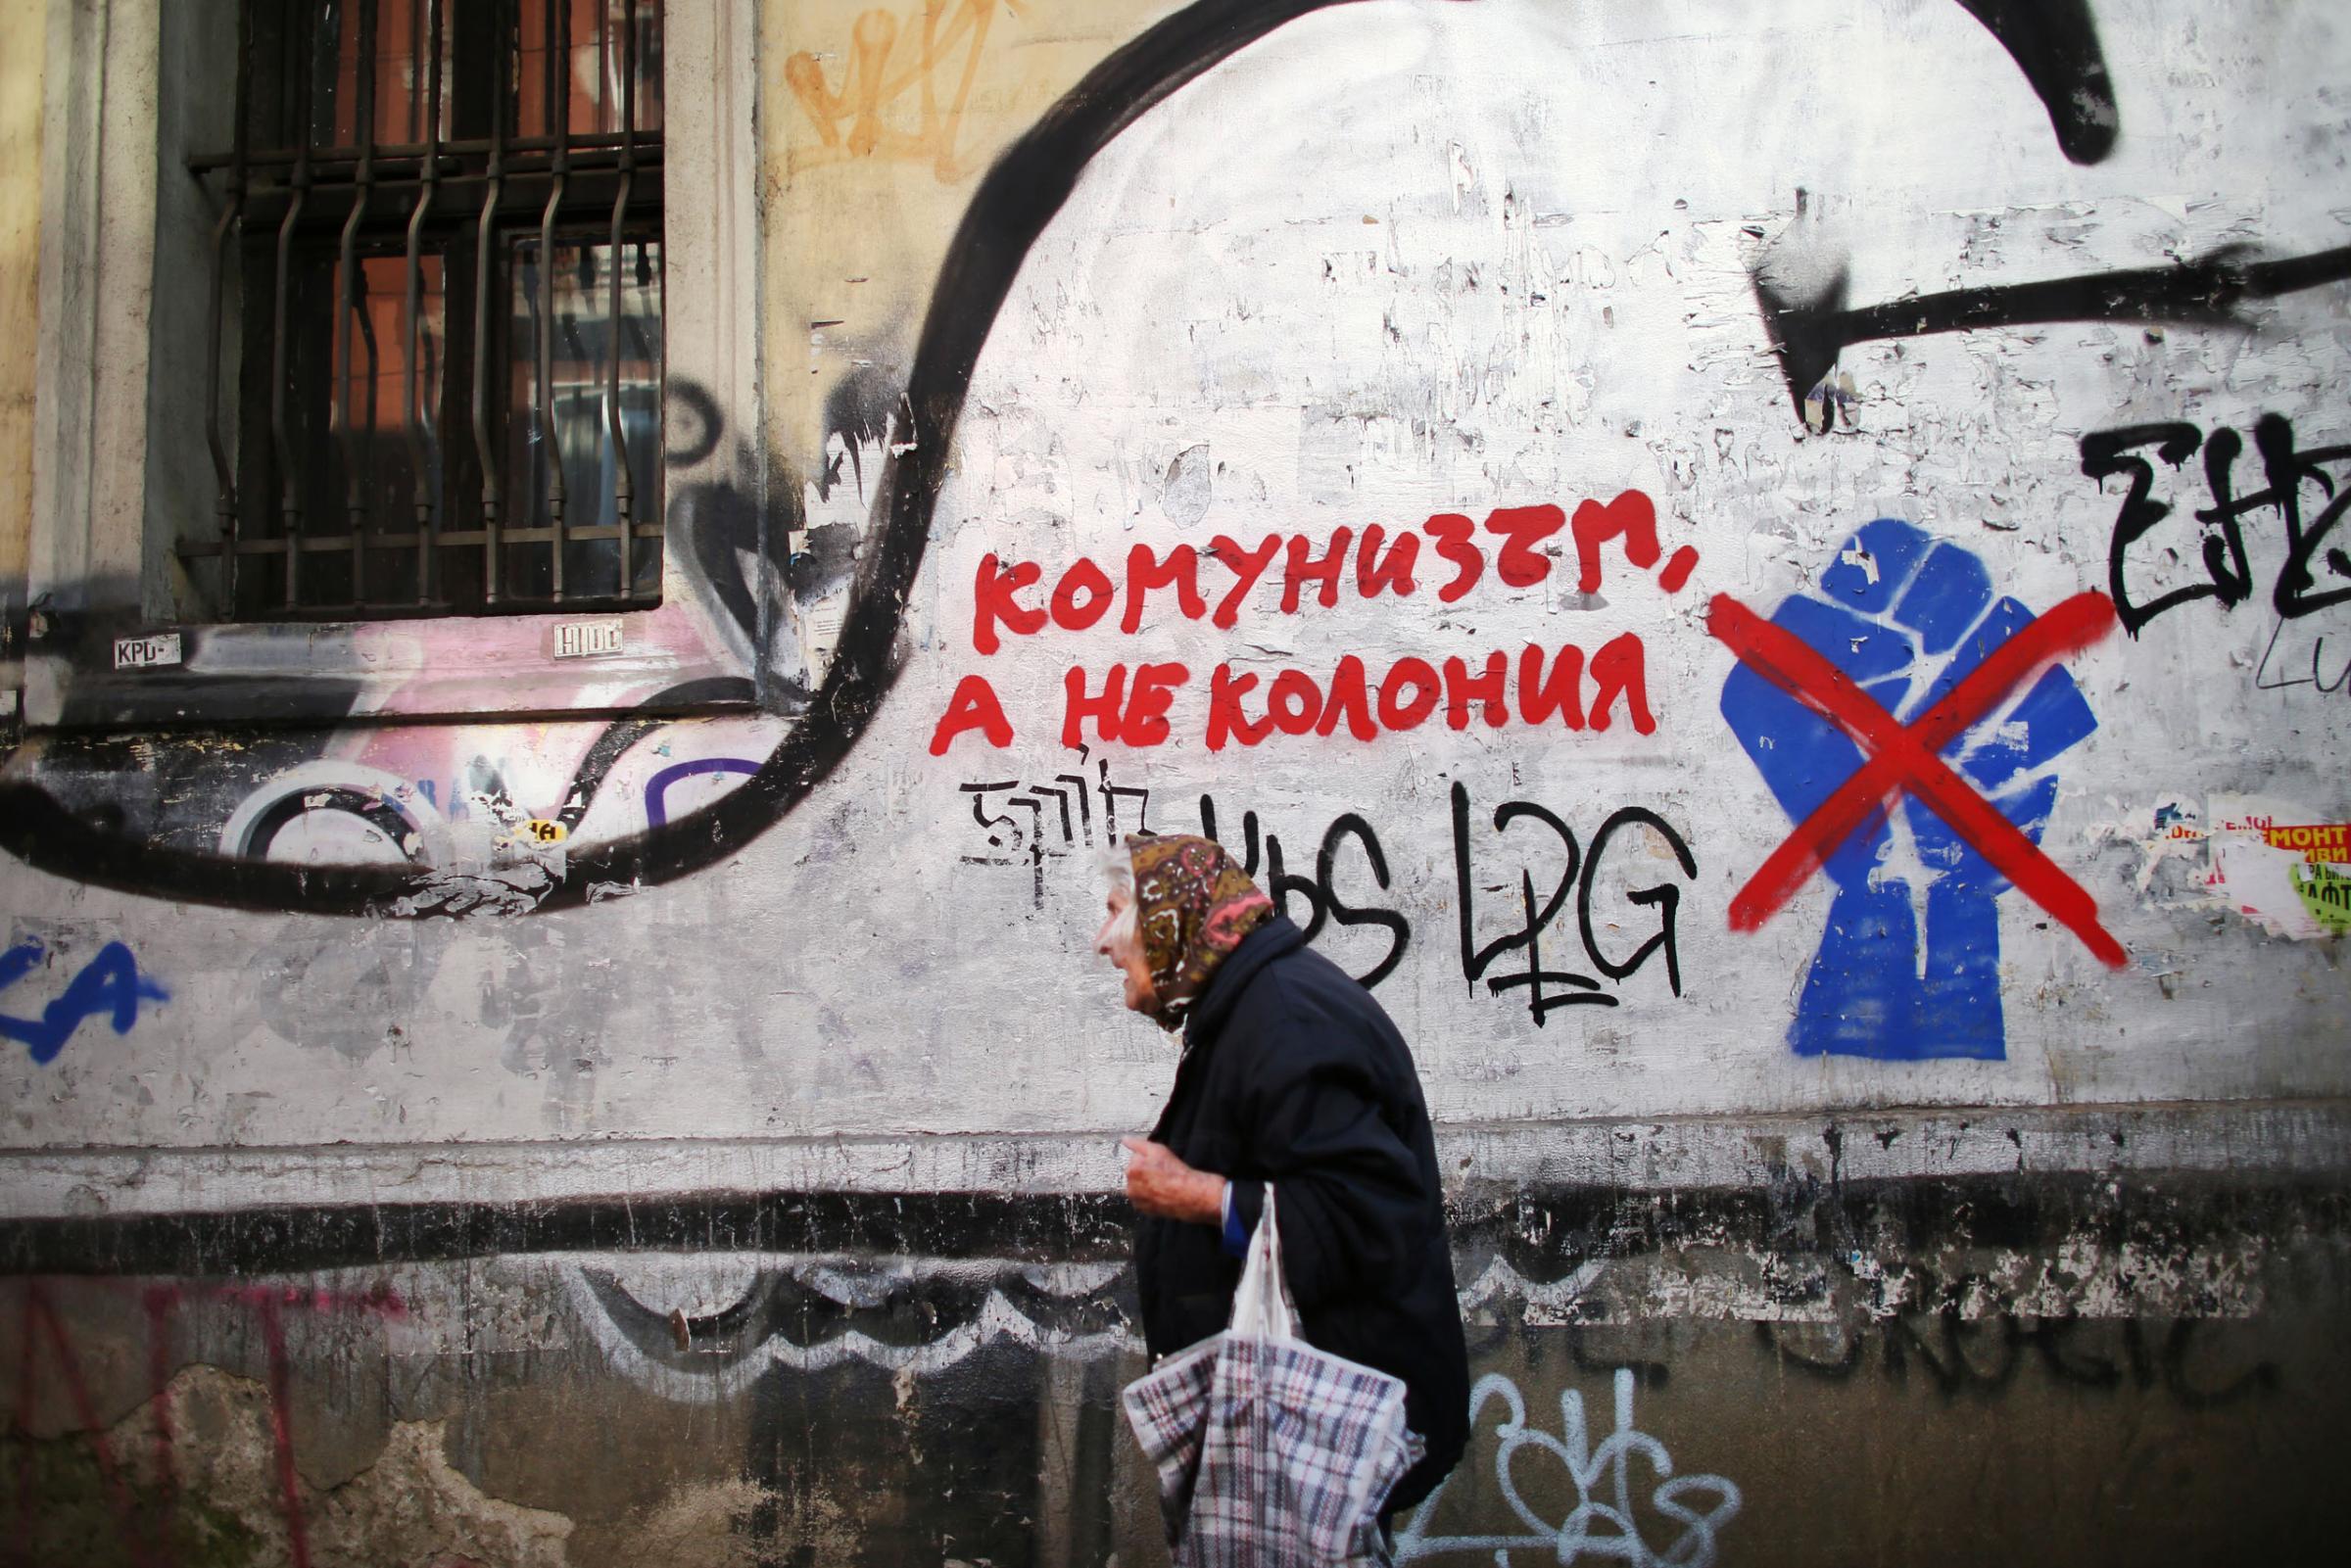 A woman walks by communist graffiti in Bulgaria's capital Sofia, on October 4th, 2014. This photo is from a project that aims to gauge the state and effect of democracy in the former Soviet satellite nation Bulgaria, two and a half decades after the fall of the Berlin Wall. The story of democracy in Bulgaria at age 25 is a cautionary tale about transplanting one-size-fits-all Western values to a nation still undergoing social and economic upheaval. Bulgaria is still one of the poorest, most corrupt nations in the European Union, its post-1989 hopes wilted by political instability, high crime rates and skyrocketing inflation. While Bulgarians can now freely vote and protest without much threat to their freedom, their new oppressor is corruption - which is at a 15 year high, across political and civil sectors alike. The ennui is so casually etched on the passerby's face that it becomes routine - one that fits in sadly well against a startling backdrop of rotting architecture, joblessness, and a vast population decline. Despite what democracy has changed in Bulgaria, the daily struggles of its populace remain largely untouched, trapped in a post-communist time capsule. This project was supported by a grant from The Pulitzer Center on Crisis Reporting. Photo by: Yana PaskovaCopyright © Yana Paskova 2014